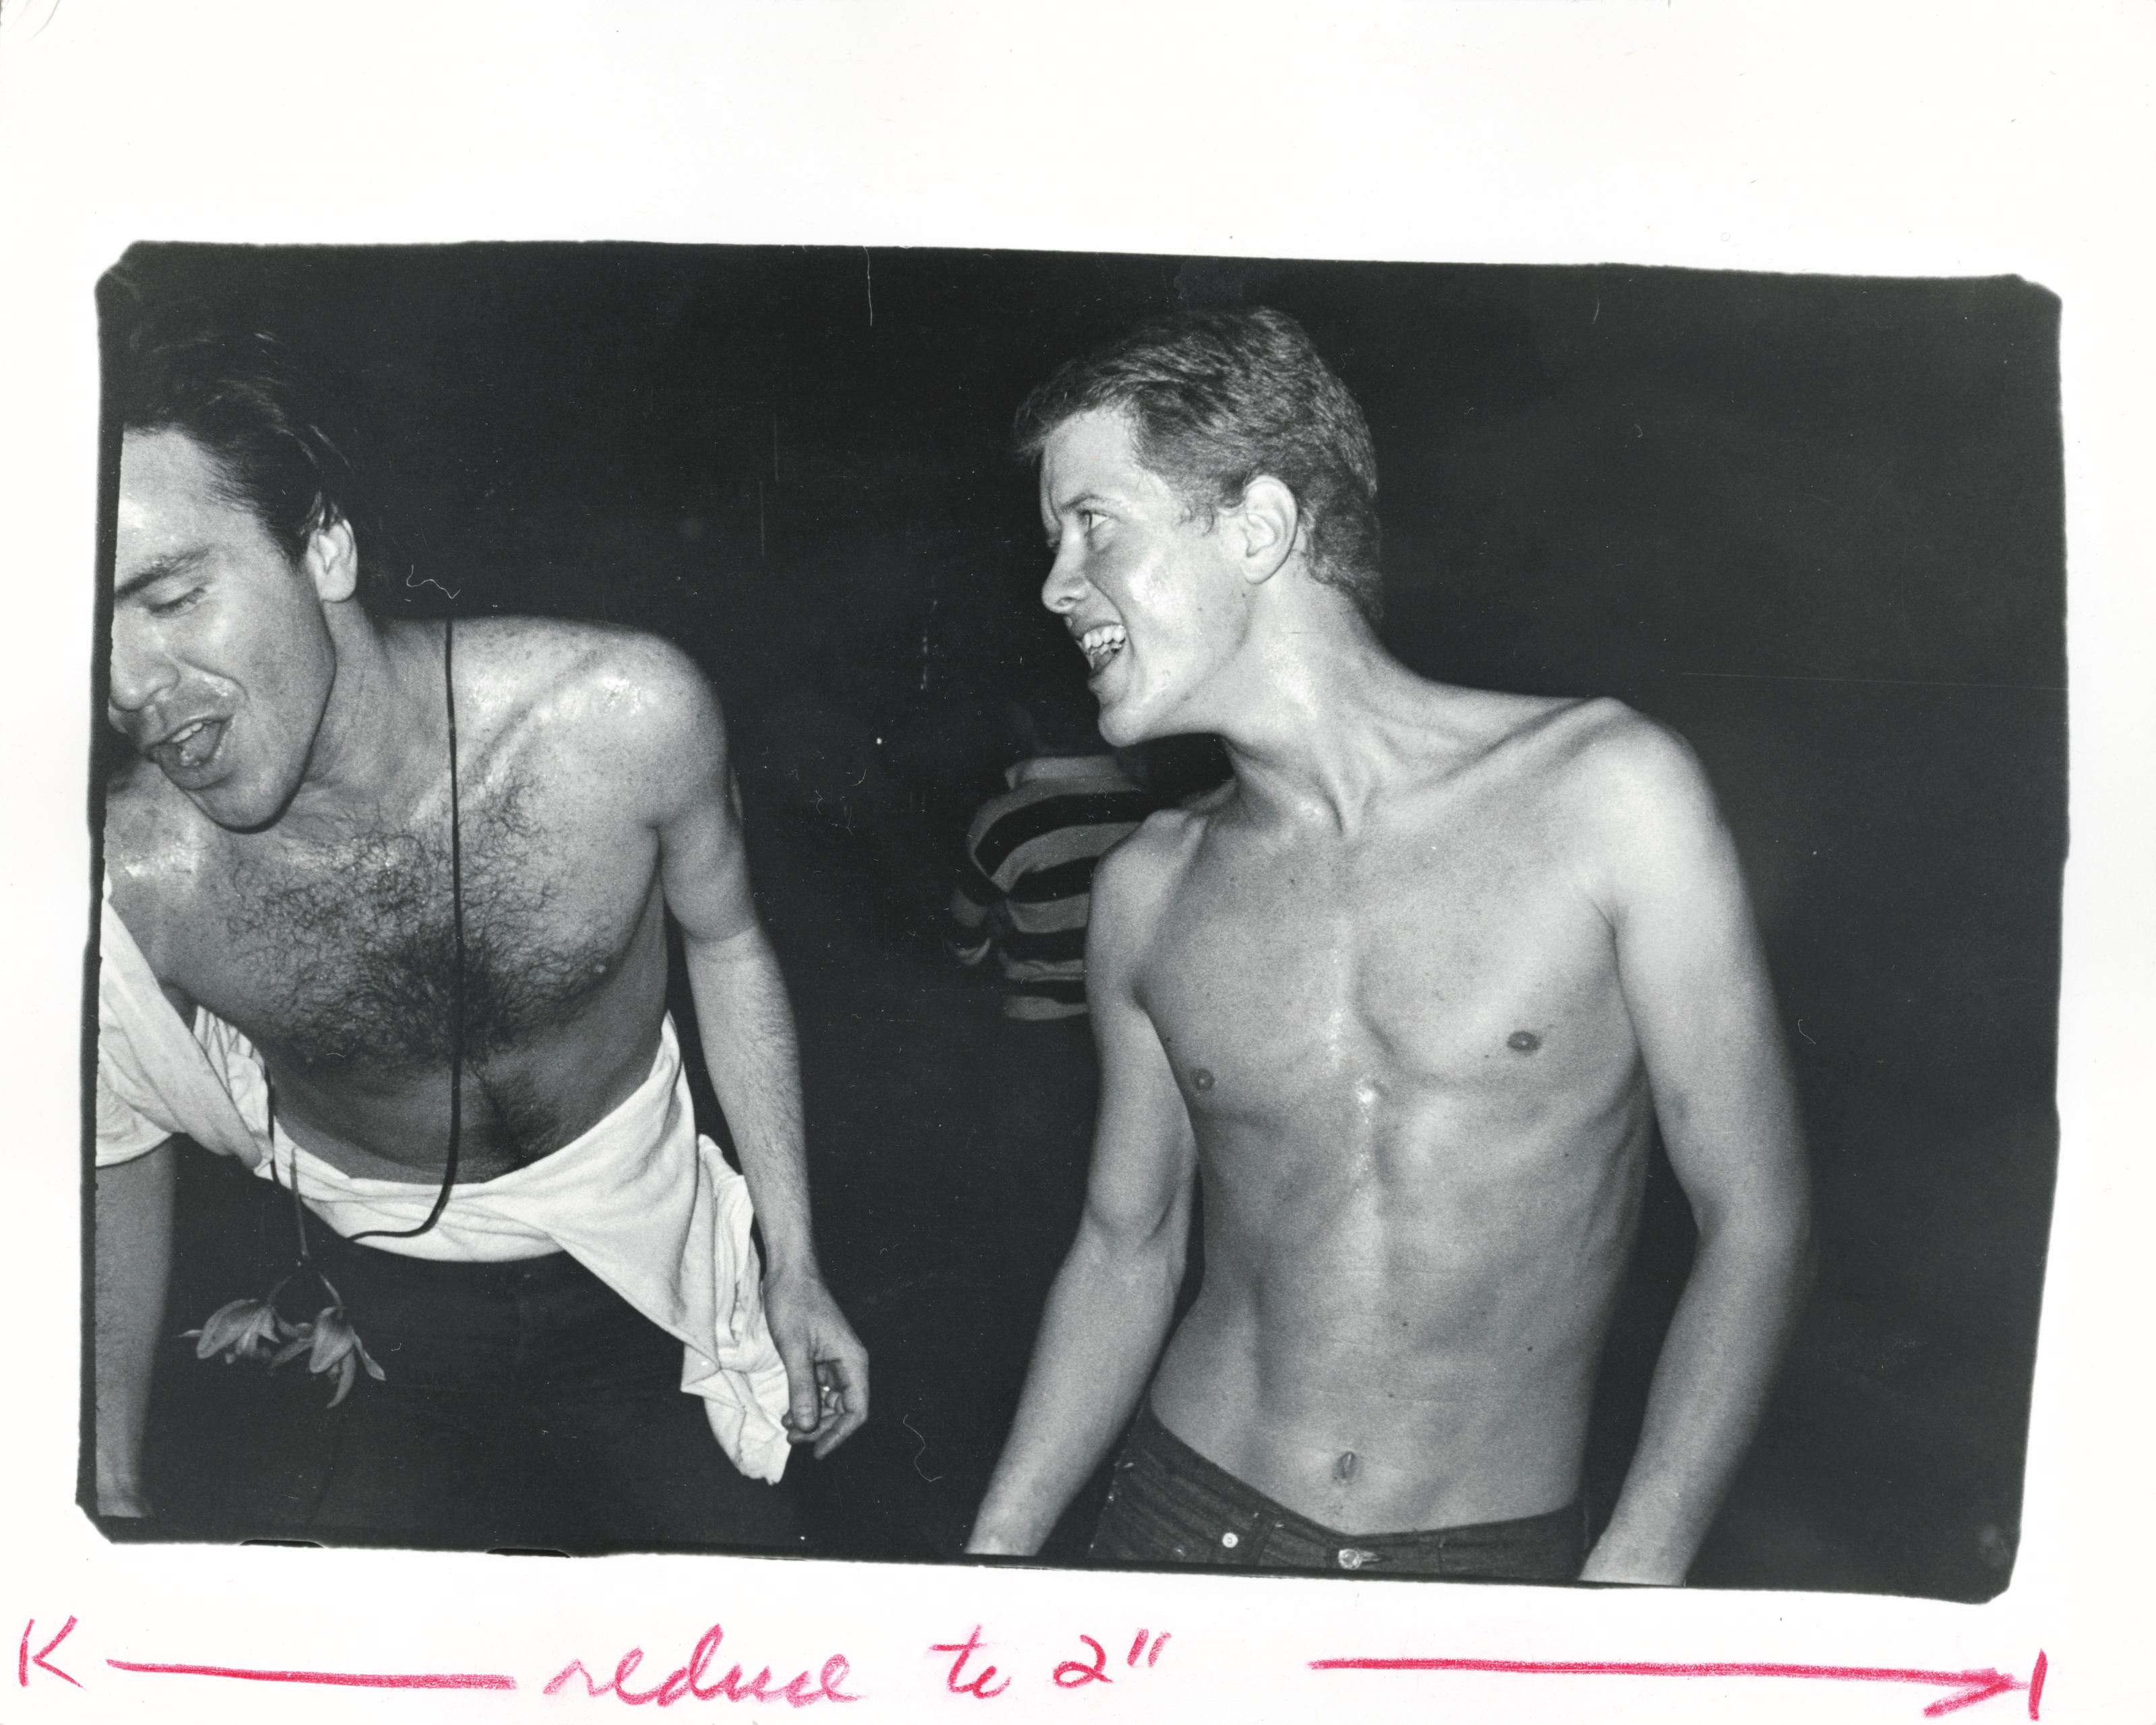 Andy Warhol Black and White Photograph - Unidentified Men (Studio 54)